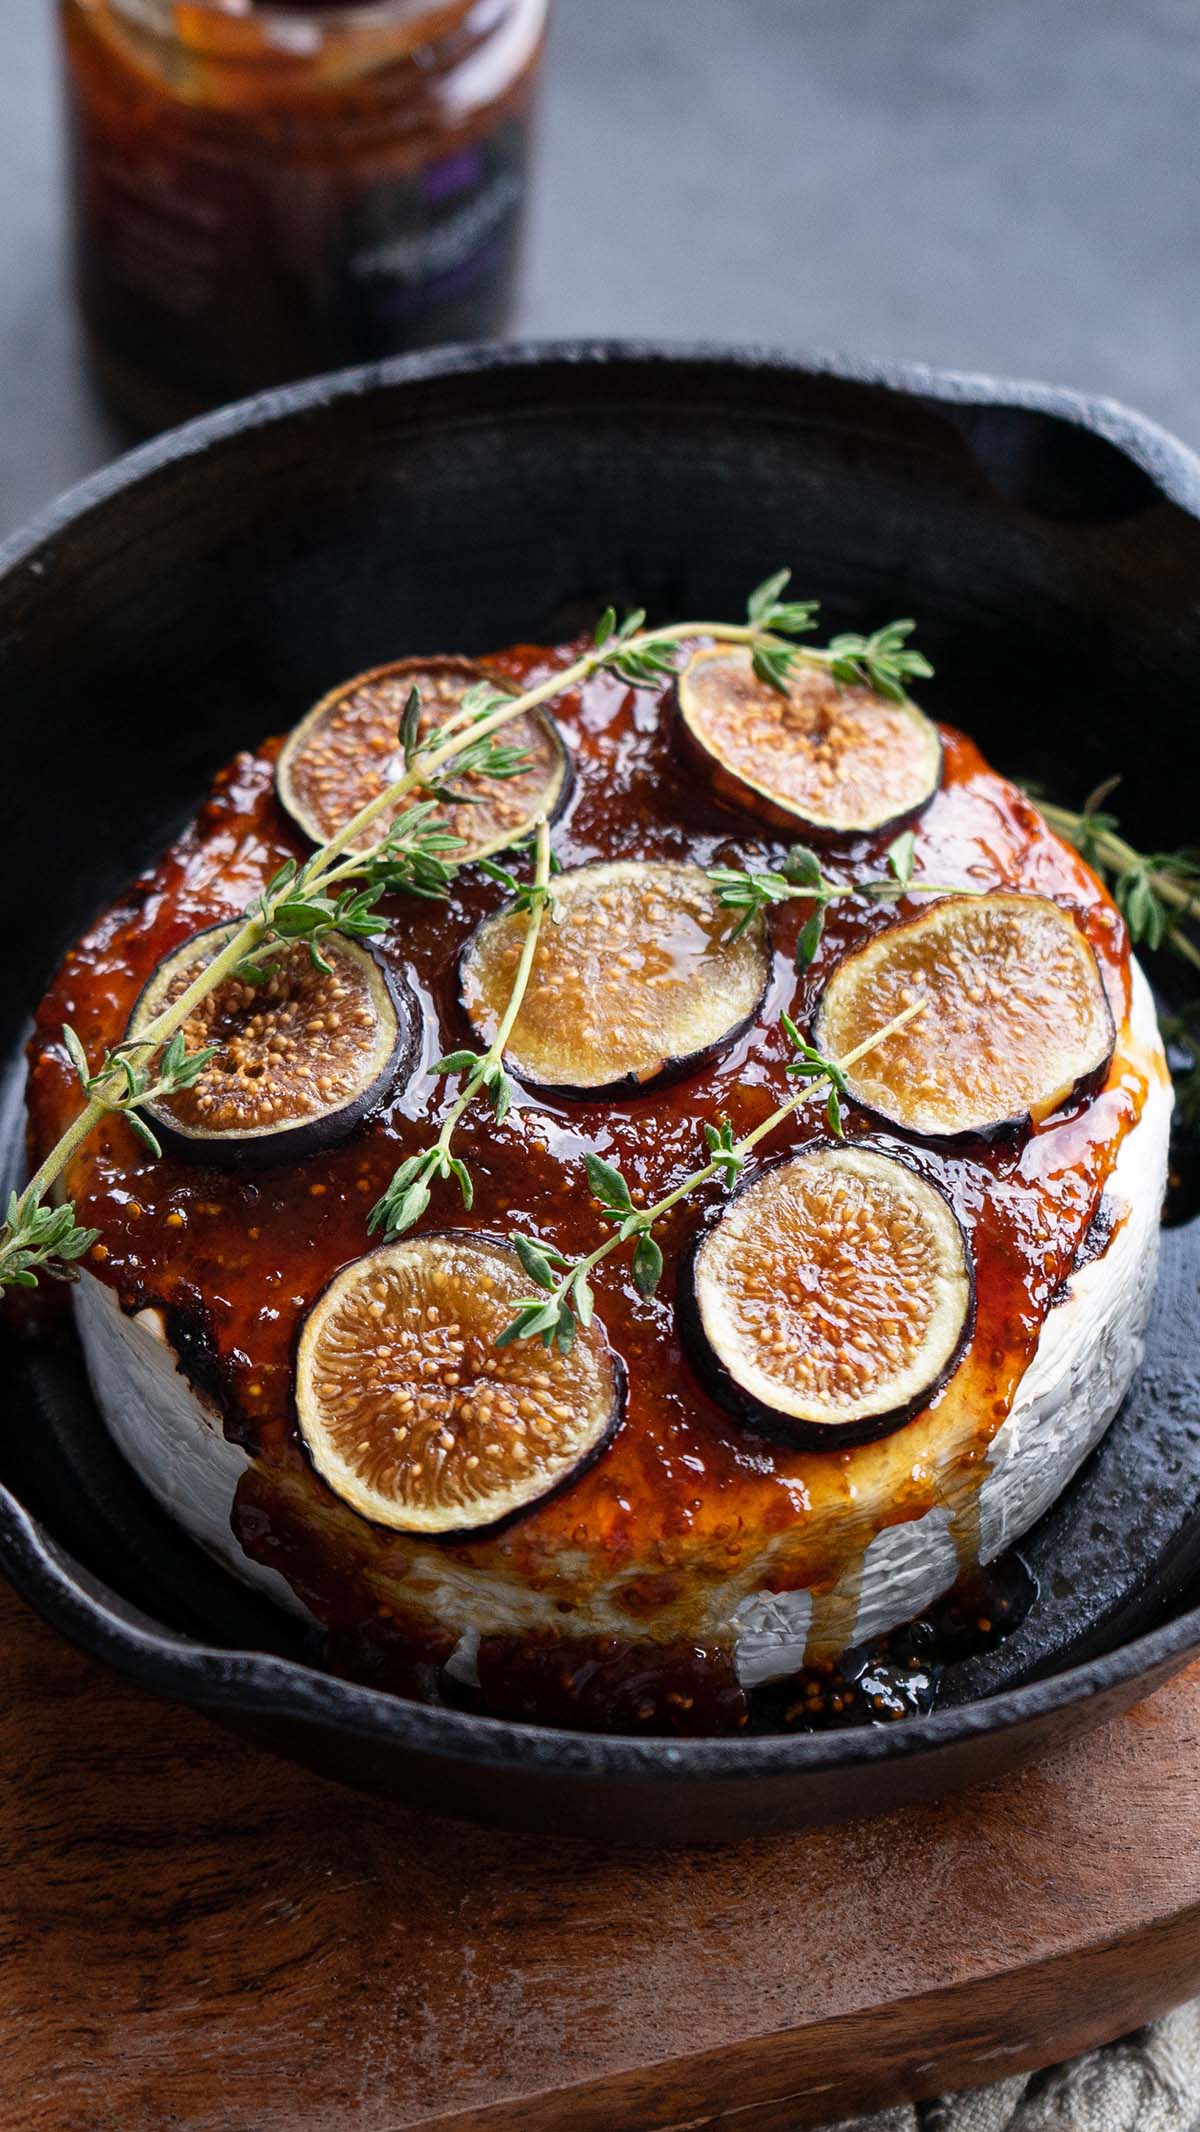 Baked brie in a cast iron drizzled with fig spread